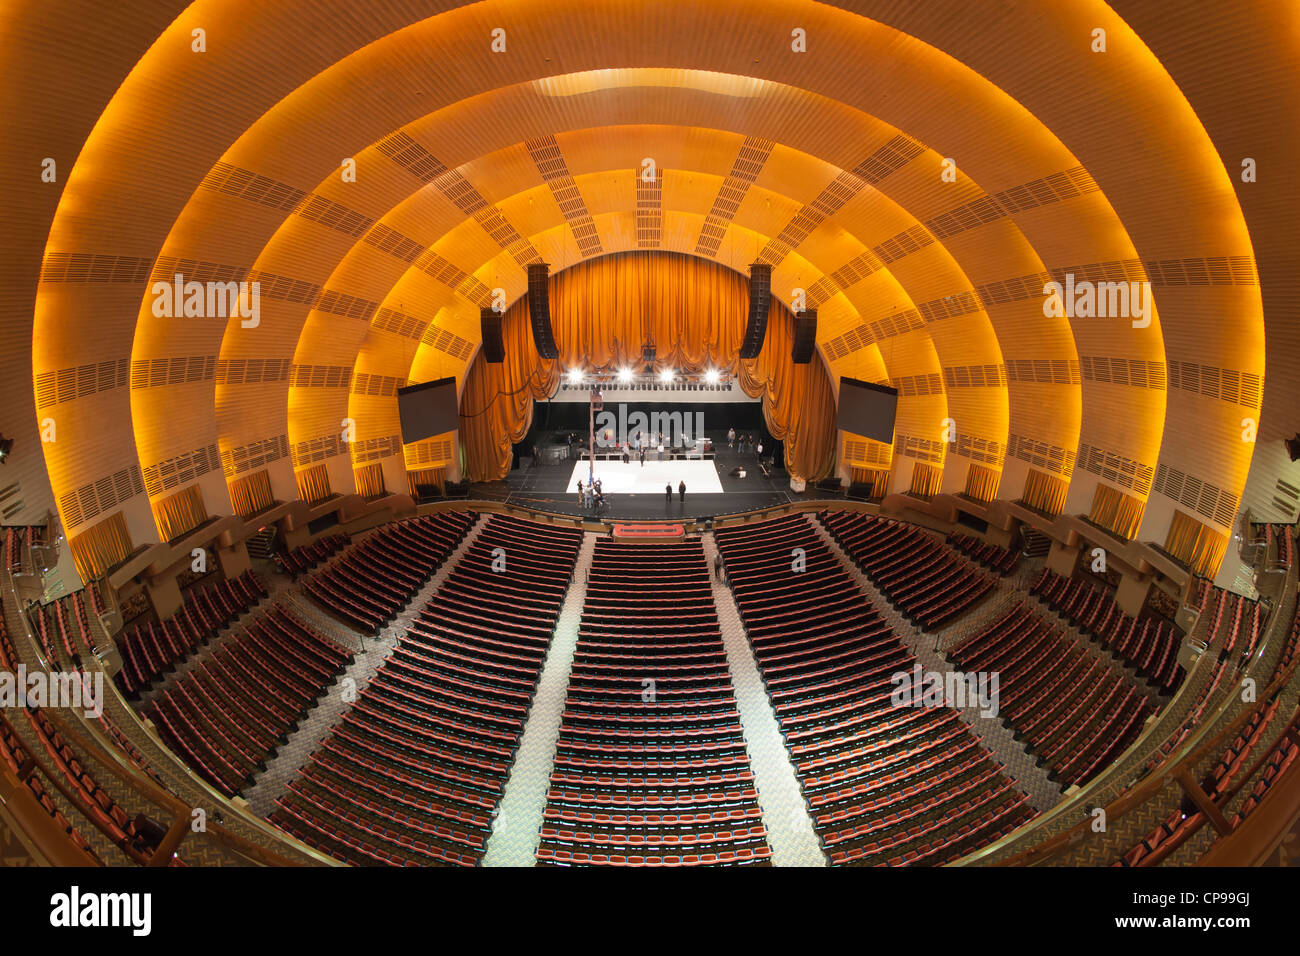 The view of the stage from the balcony as workers prepare for a show in historic Radio City Music Hall in New York City. Stock Photo